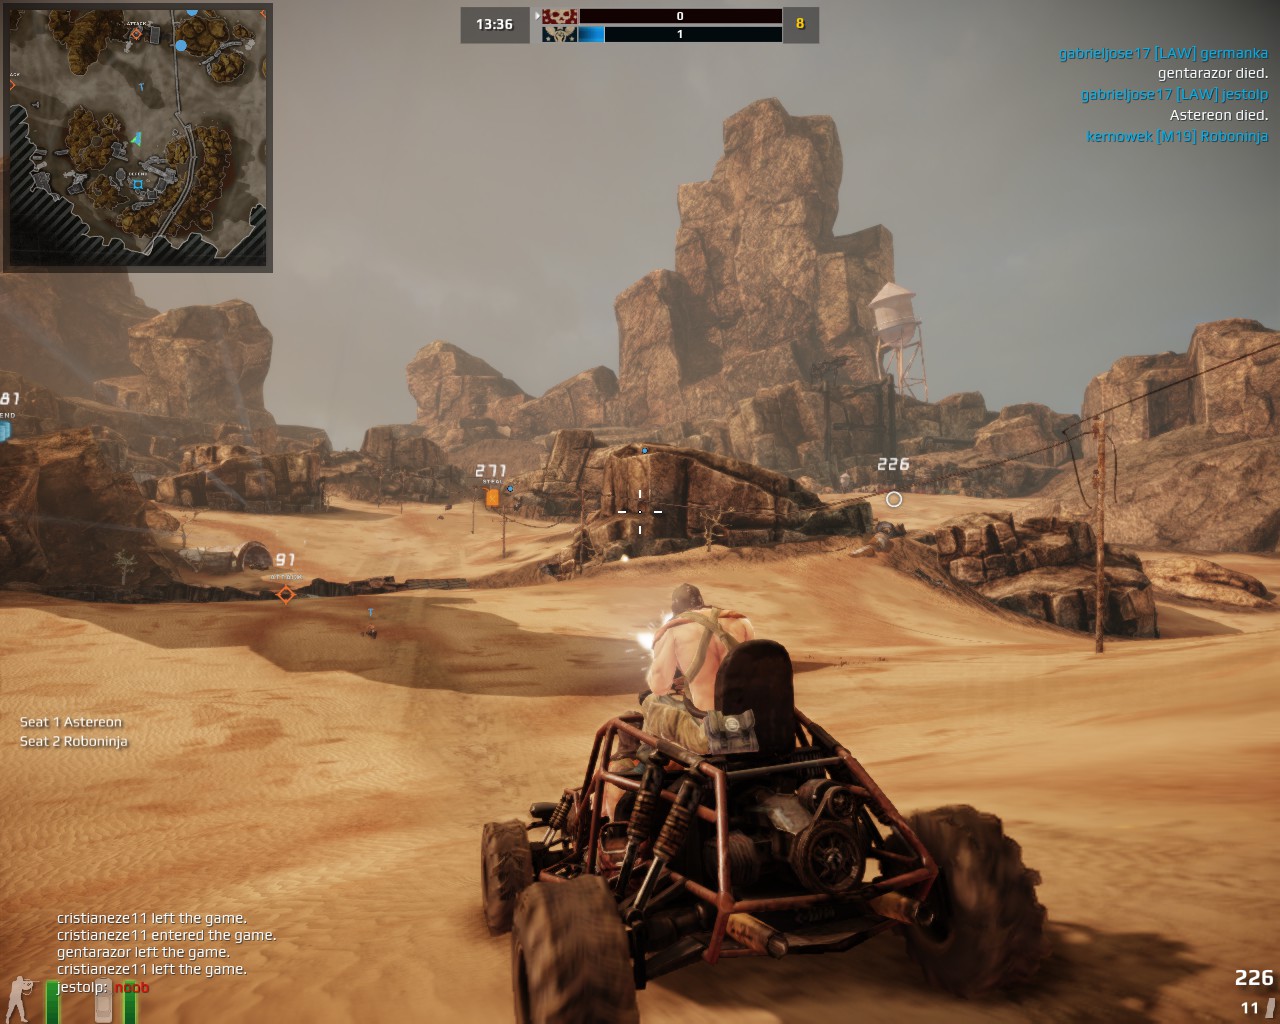 Crazy vehicles keep the fast-paced combat fun.